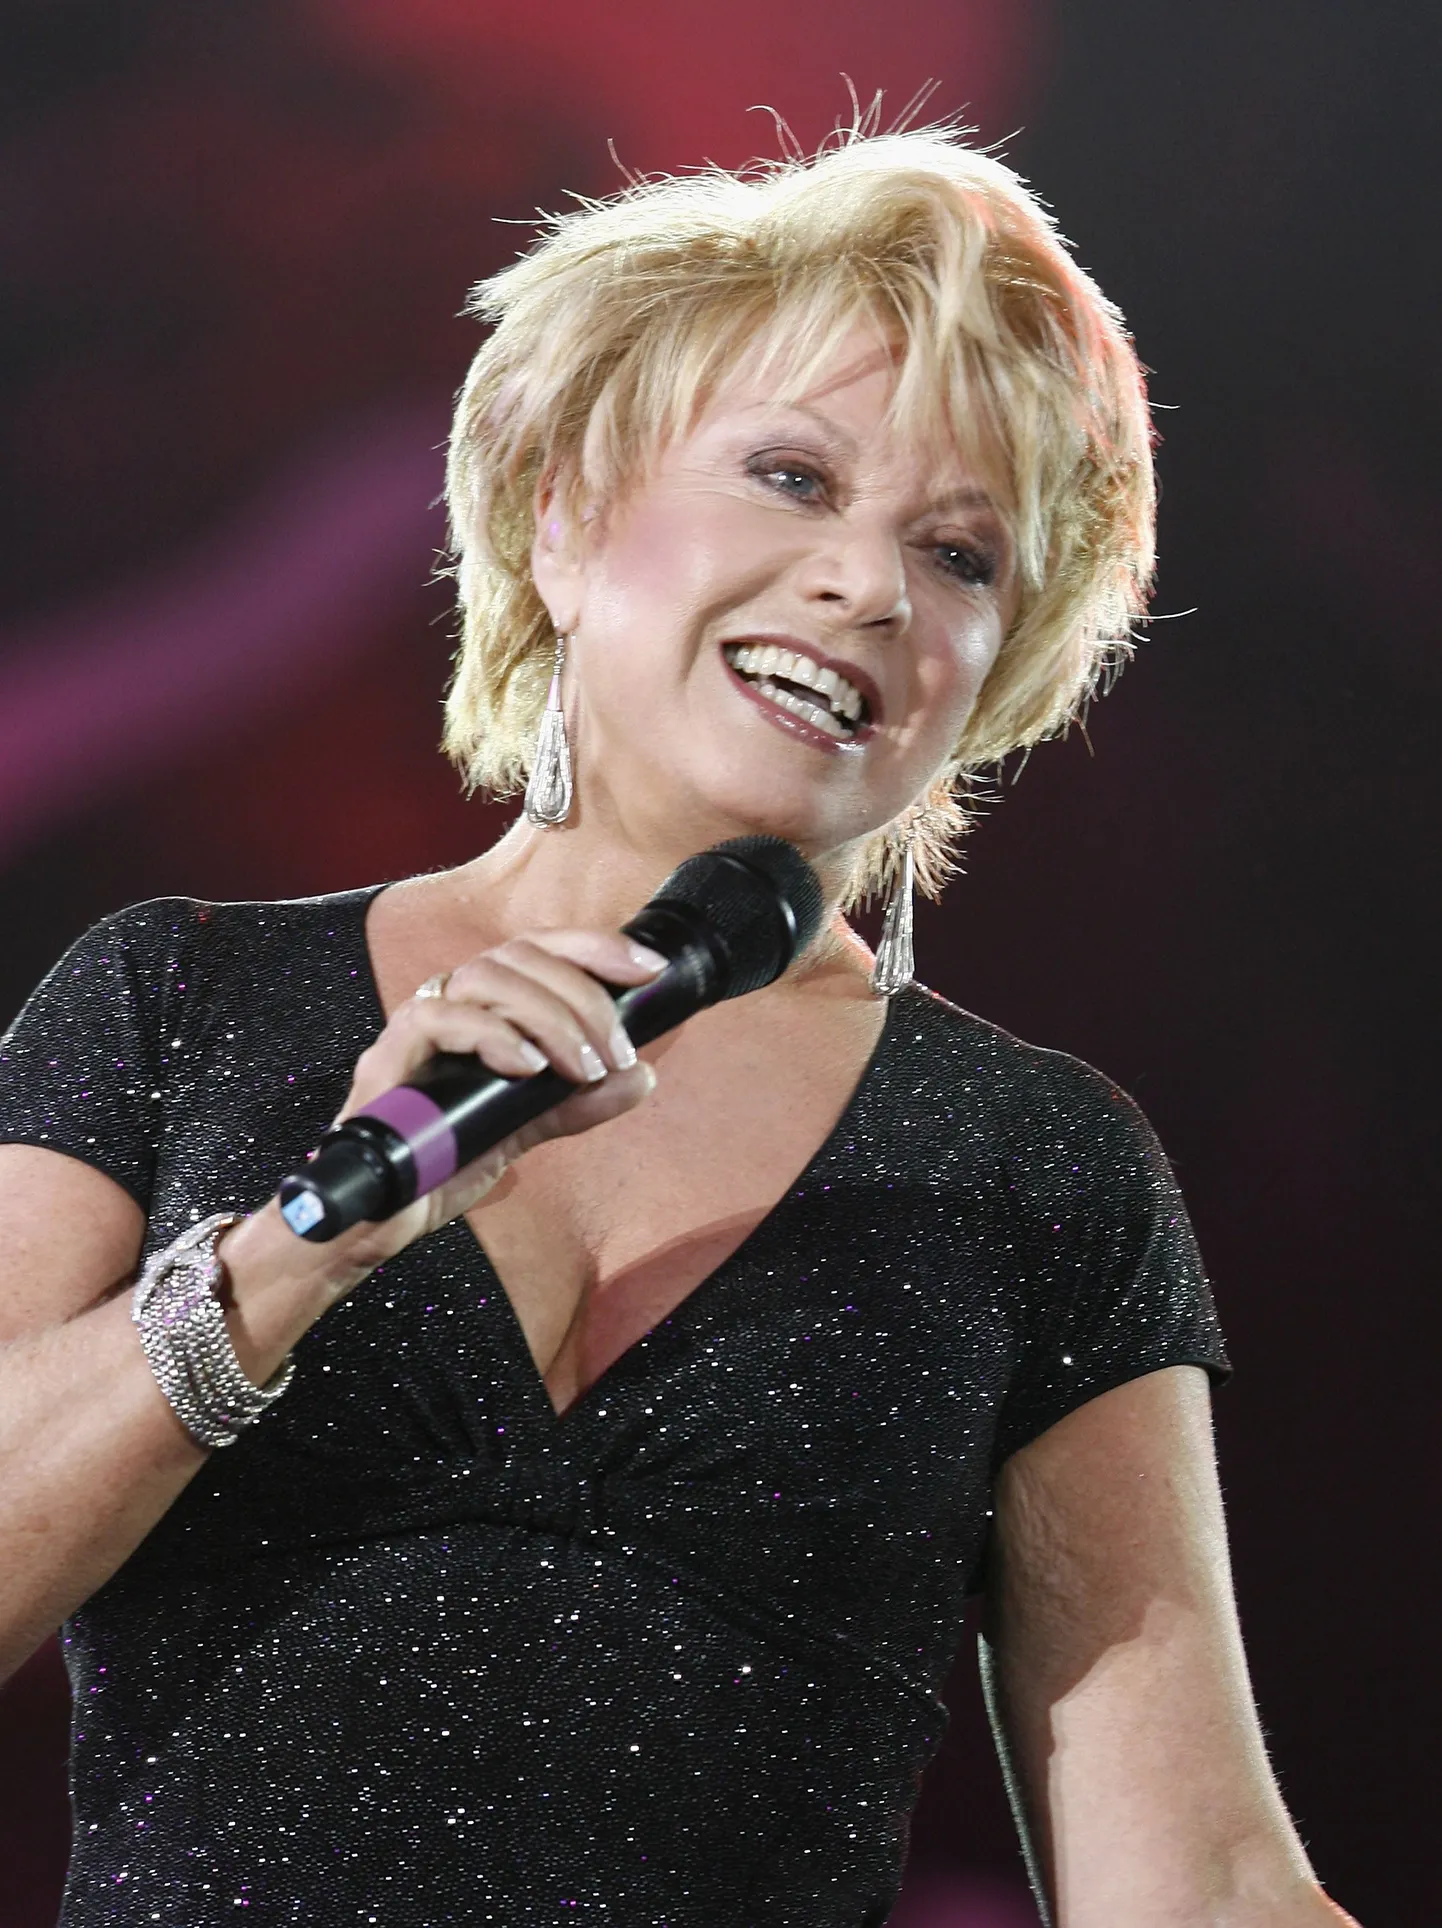 Elaine Paige performs on stage at the 'We Love Abba, Thank You for the Music' concert in Hyde Park, London.